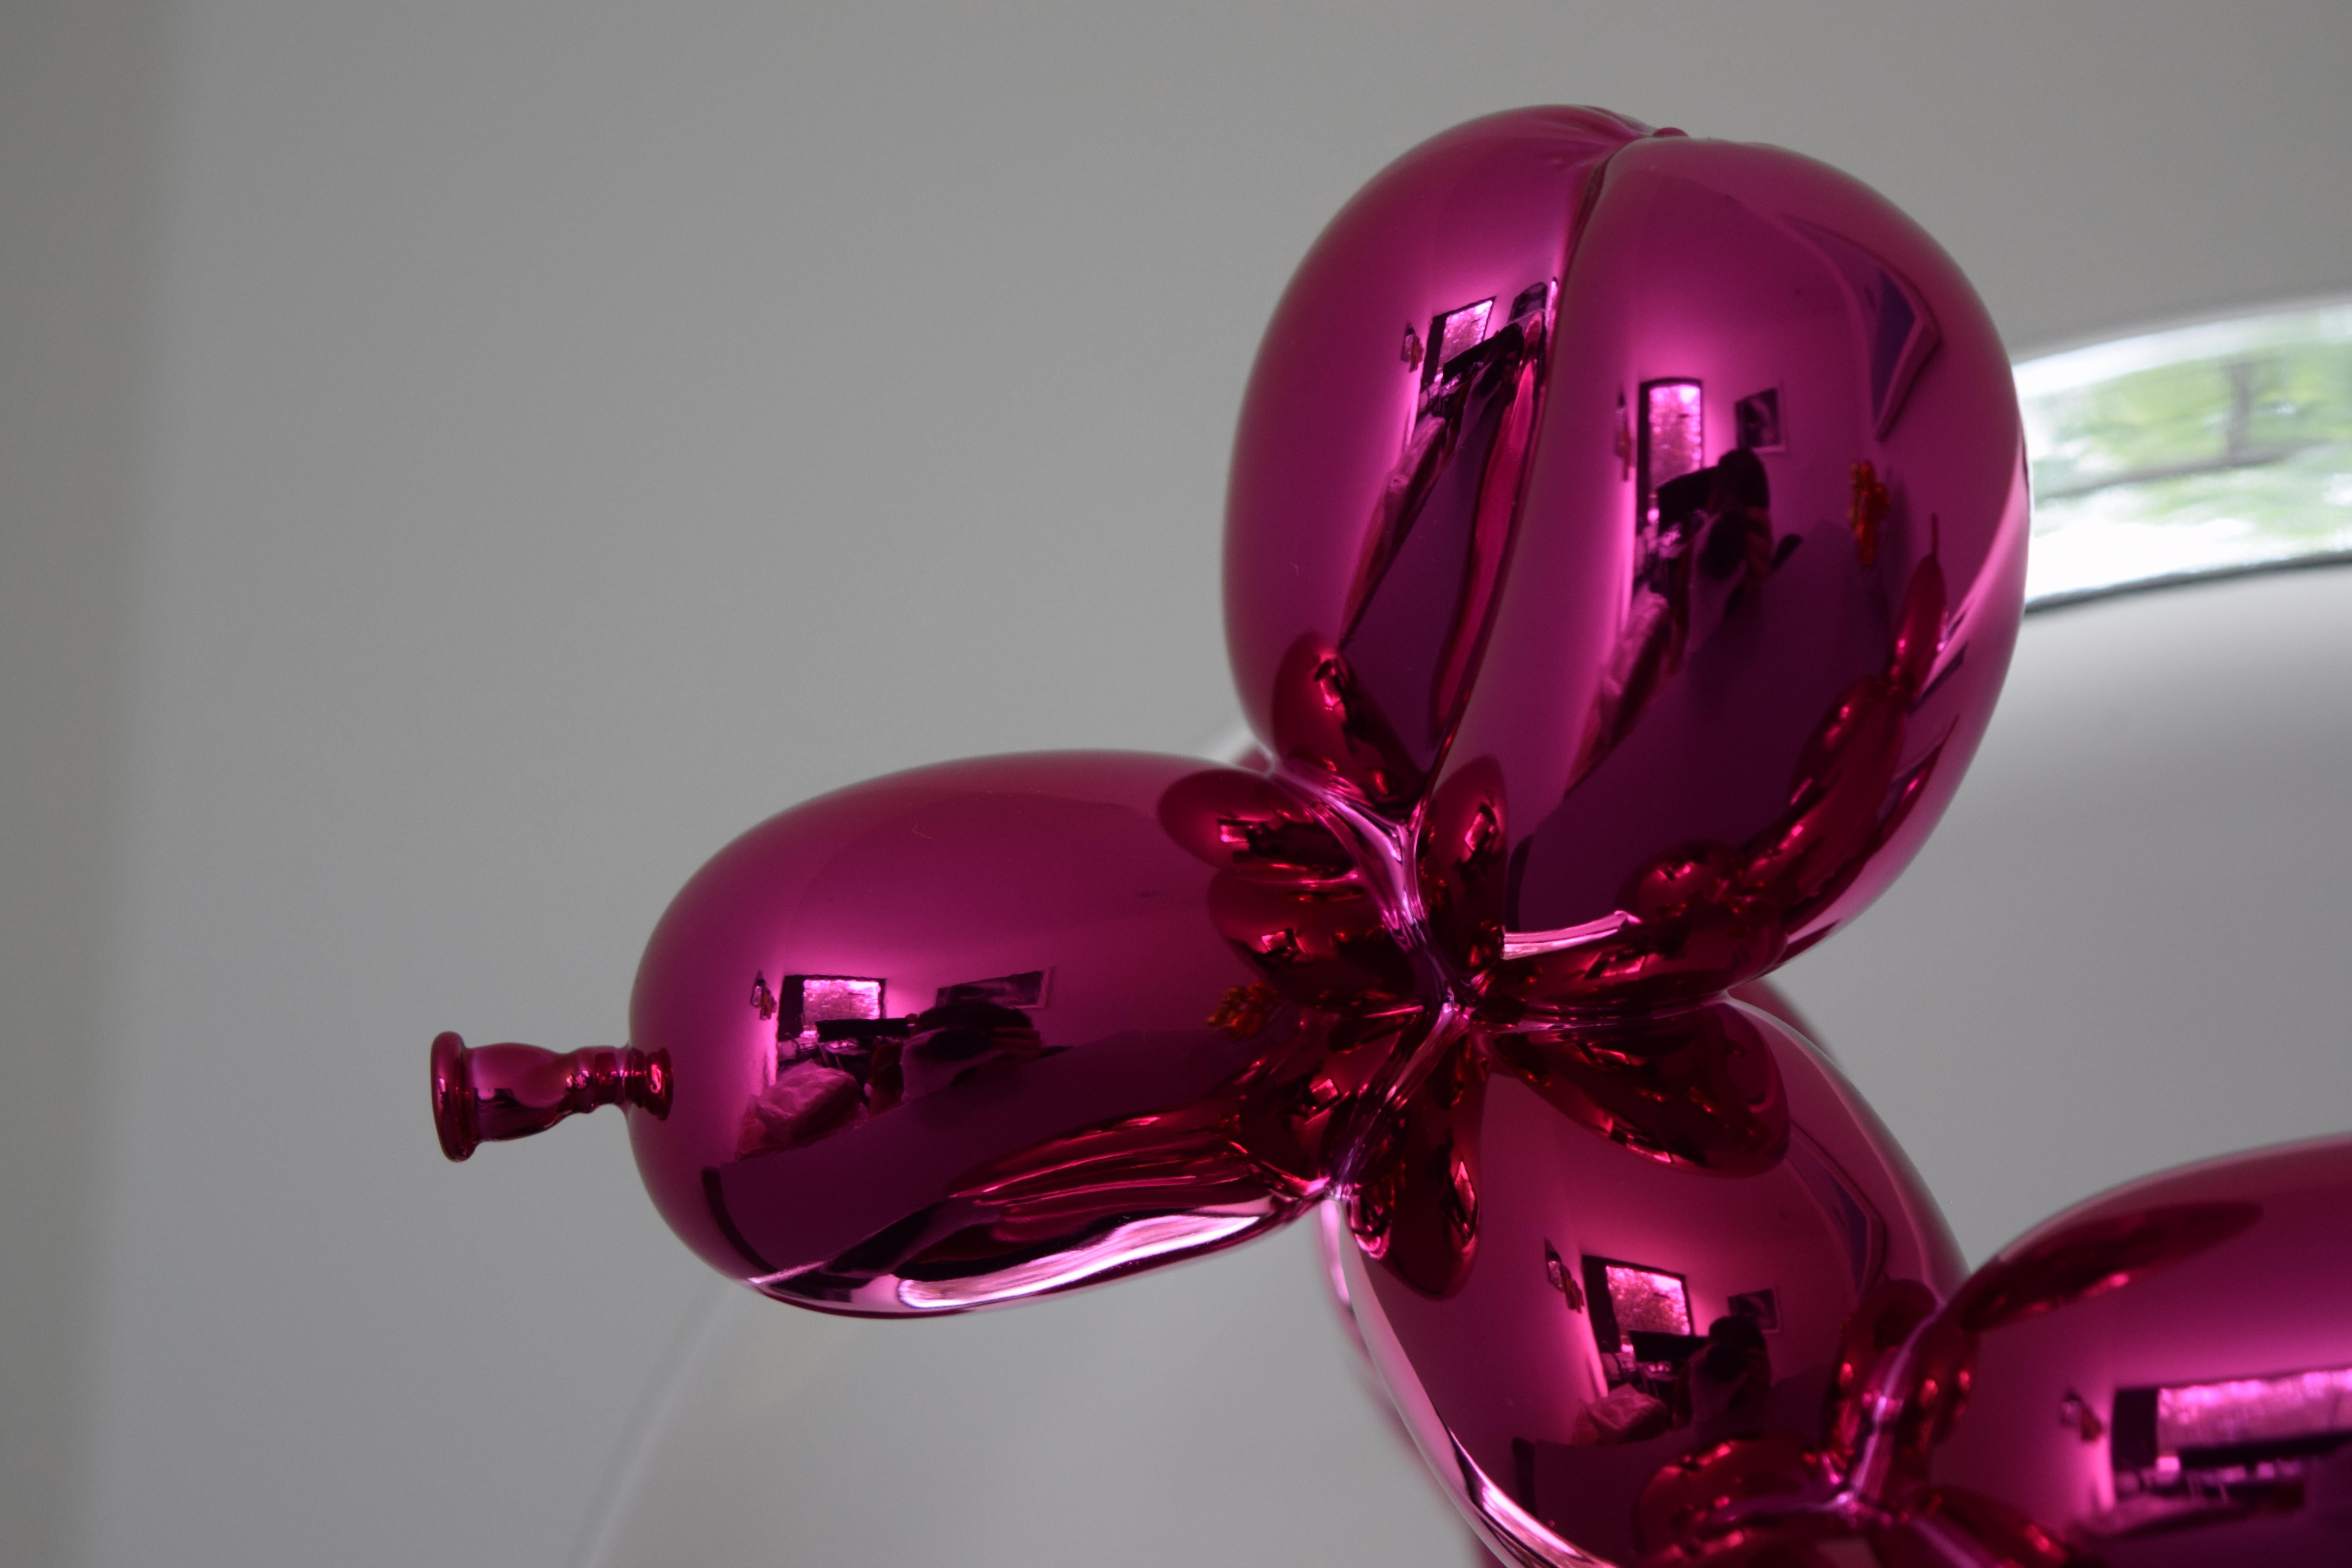 Magenta Balloon Dog Iconic Sculpture by Jeff Koons, Porcelain, Contemporary Art For Sale 7